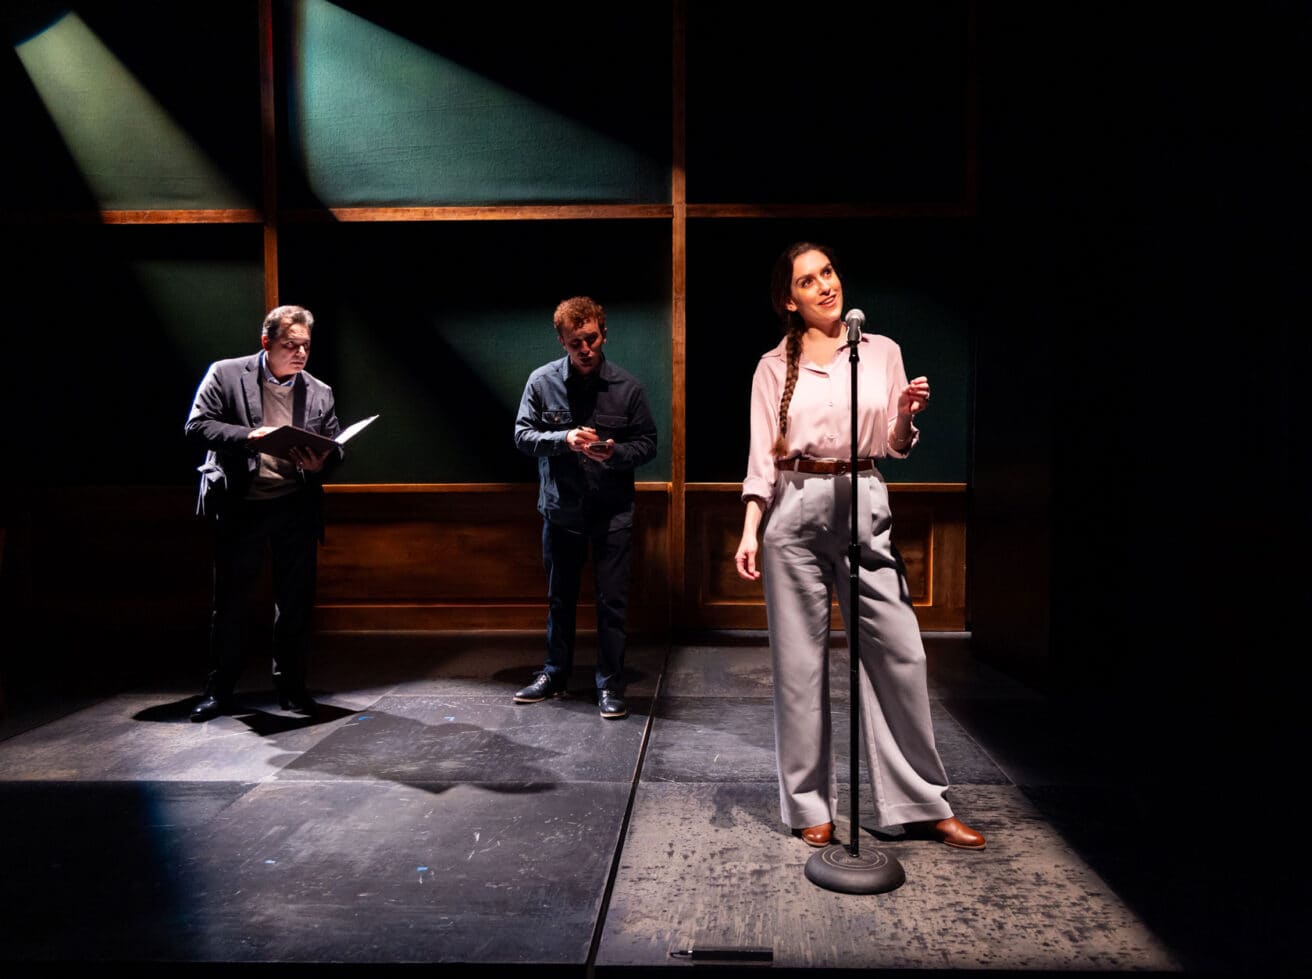 Image of actors performing in "This Much I Know" by Jonathan Spector